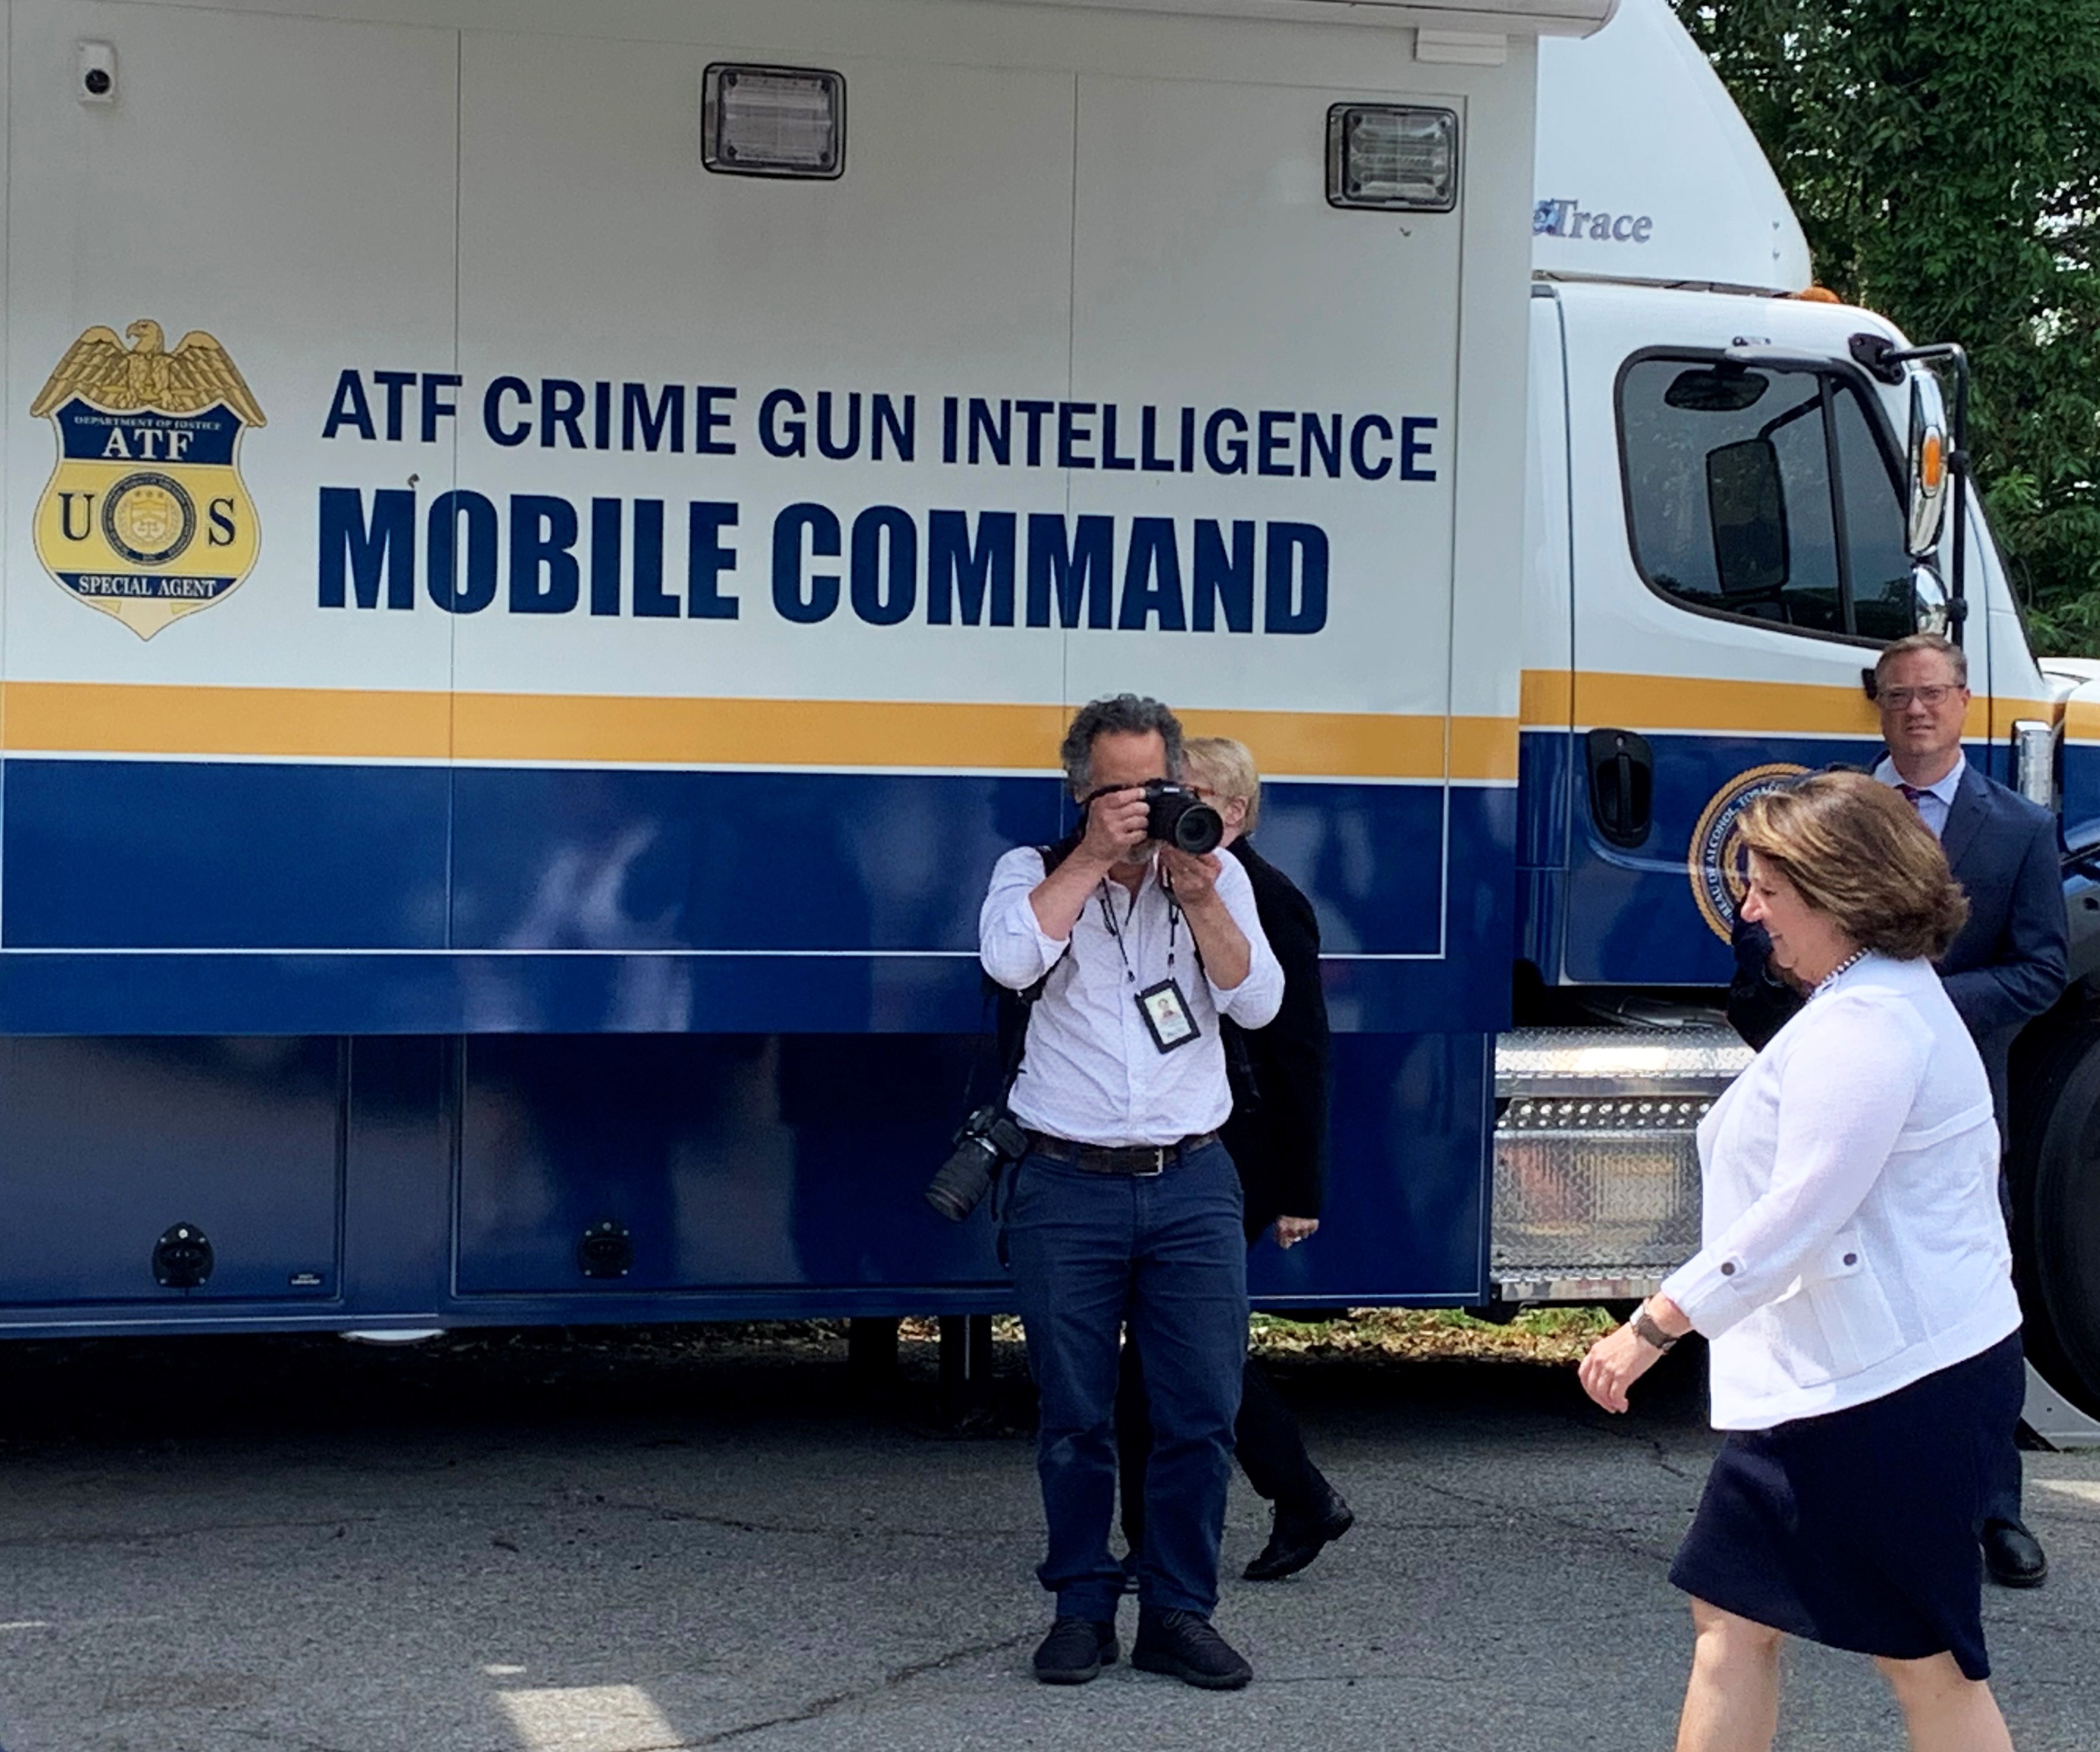 Deputy Attorney General Monaco arrives at the ATF Crime Gun Intelligence Mobile Command Center, which provides investigators with crime gun intelligence information in a mobile office environment, and can process evidence from crimes in as little of two hours. This facility on wheels is equipped with four rooms and six workstations with the ability to accommodate up to 16 people working comfortably.